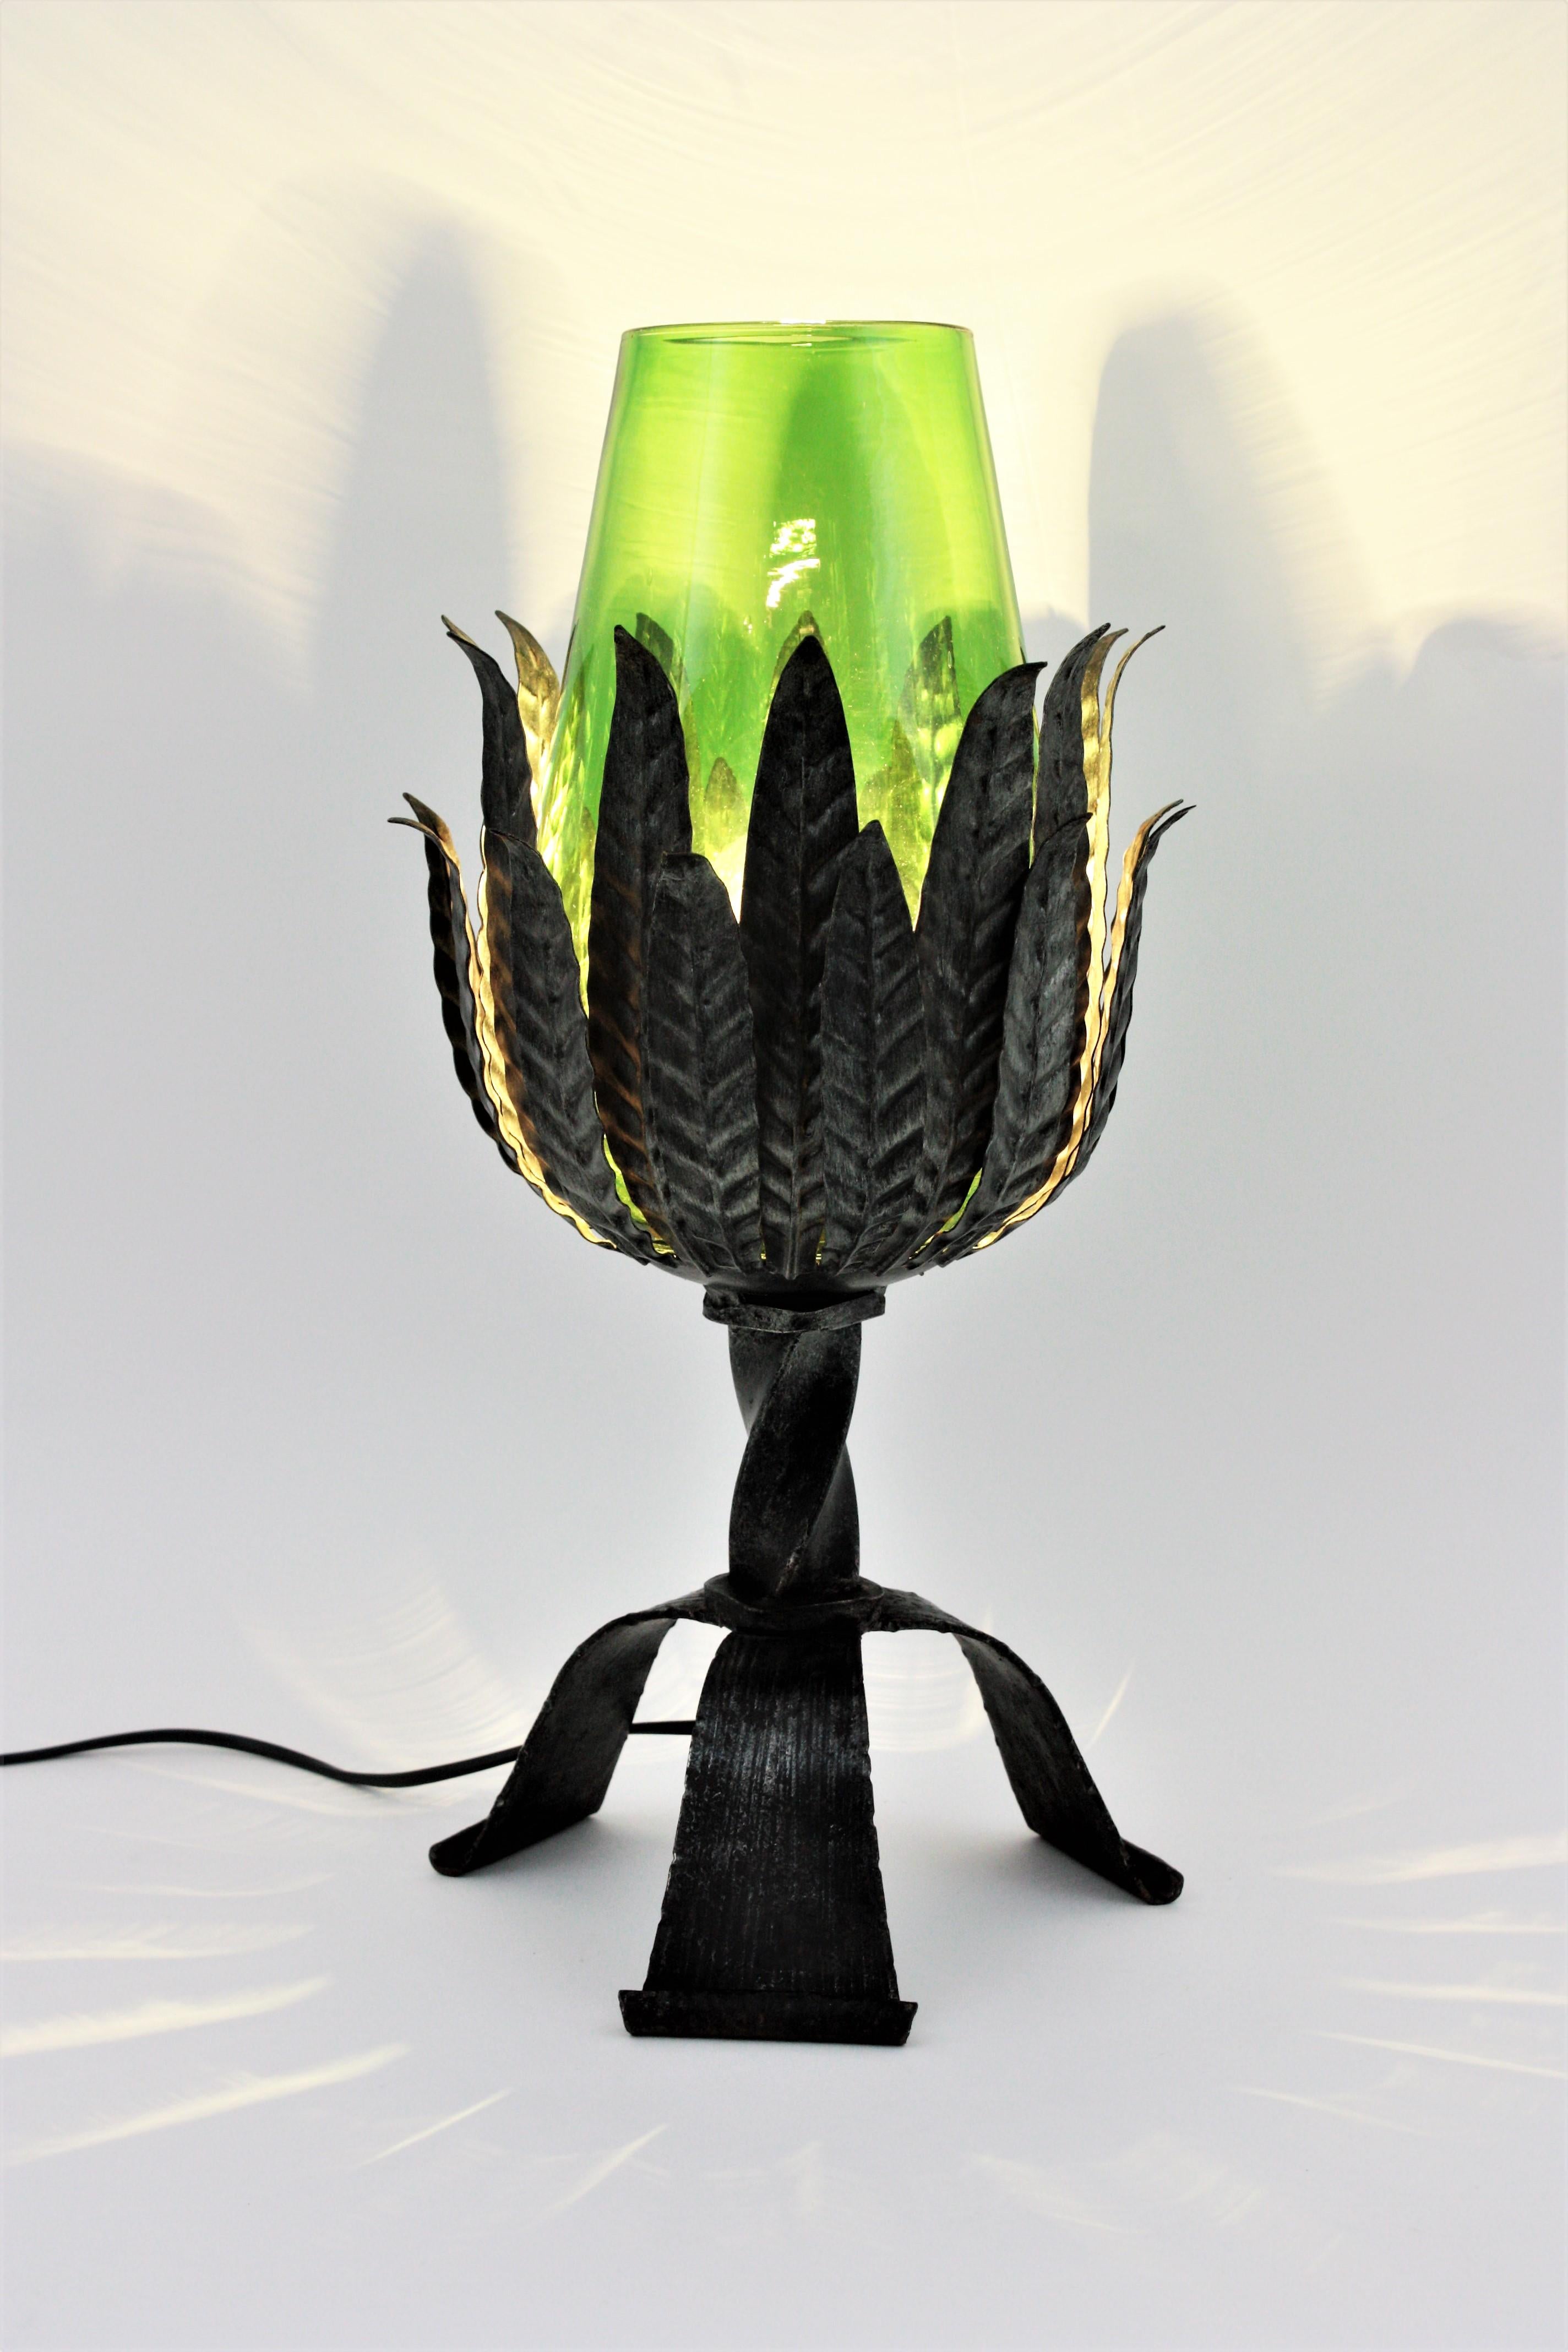 Brutalist Spanish Table Lamp, Wrought Iron and Green Glass, 1950s For Sale